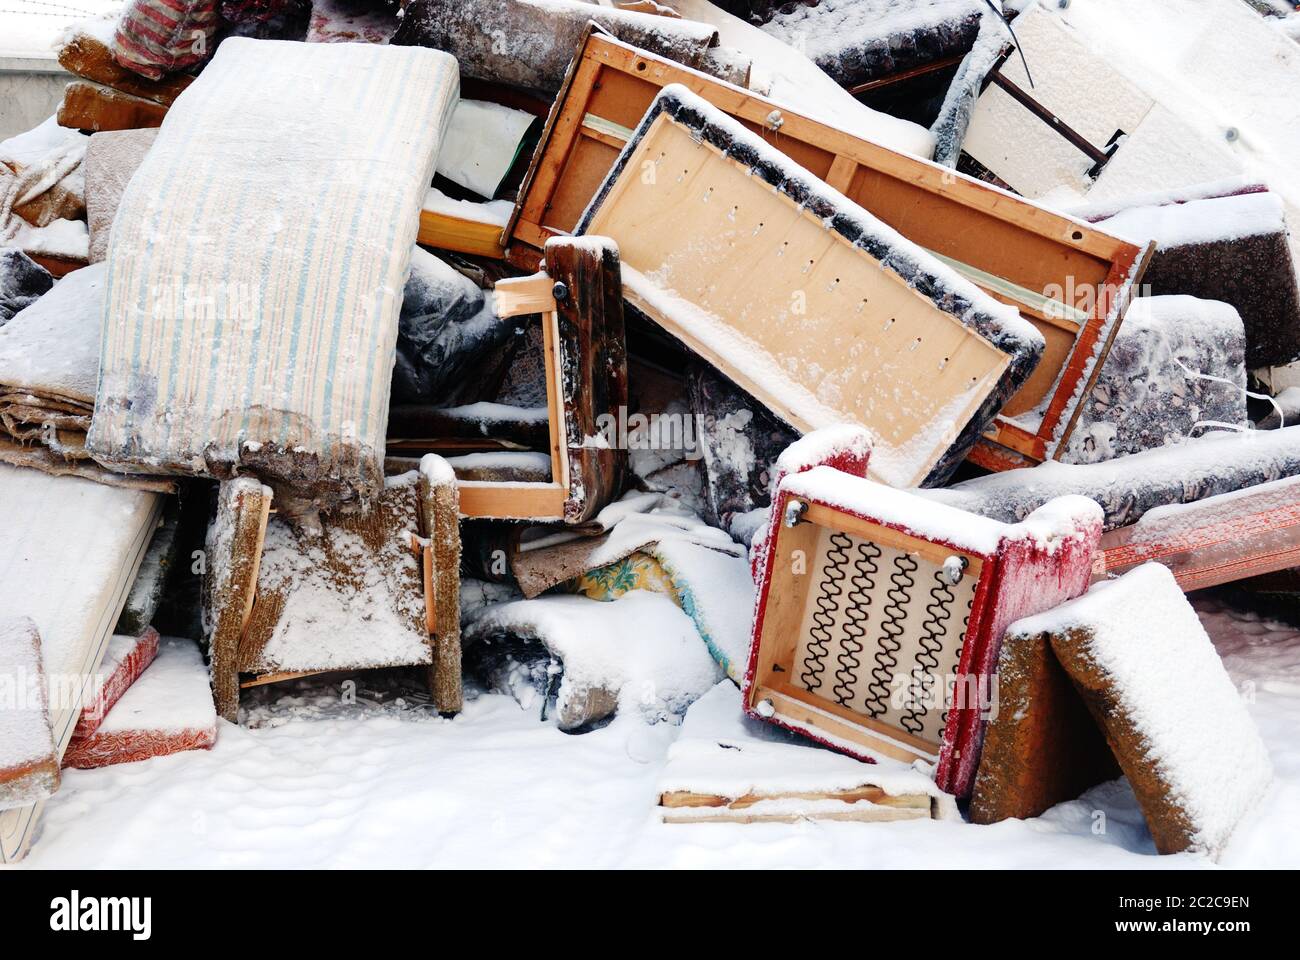 old furniture for disposal Stock Photo